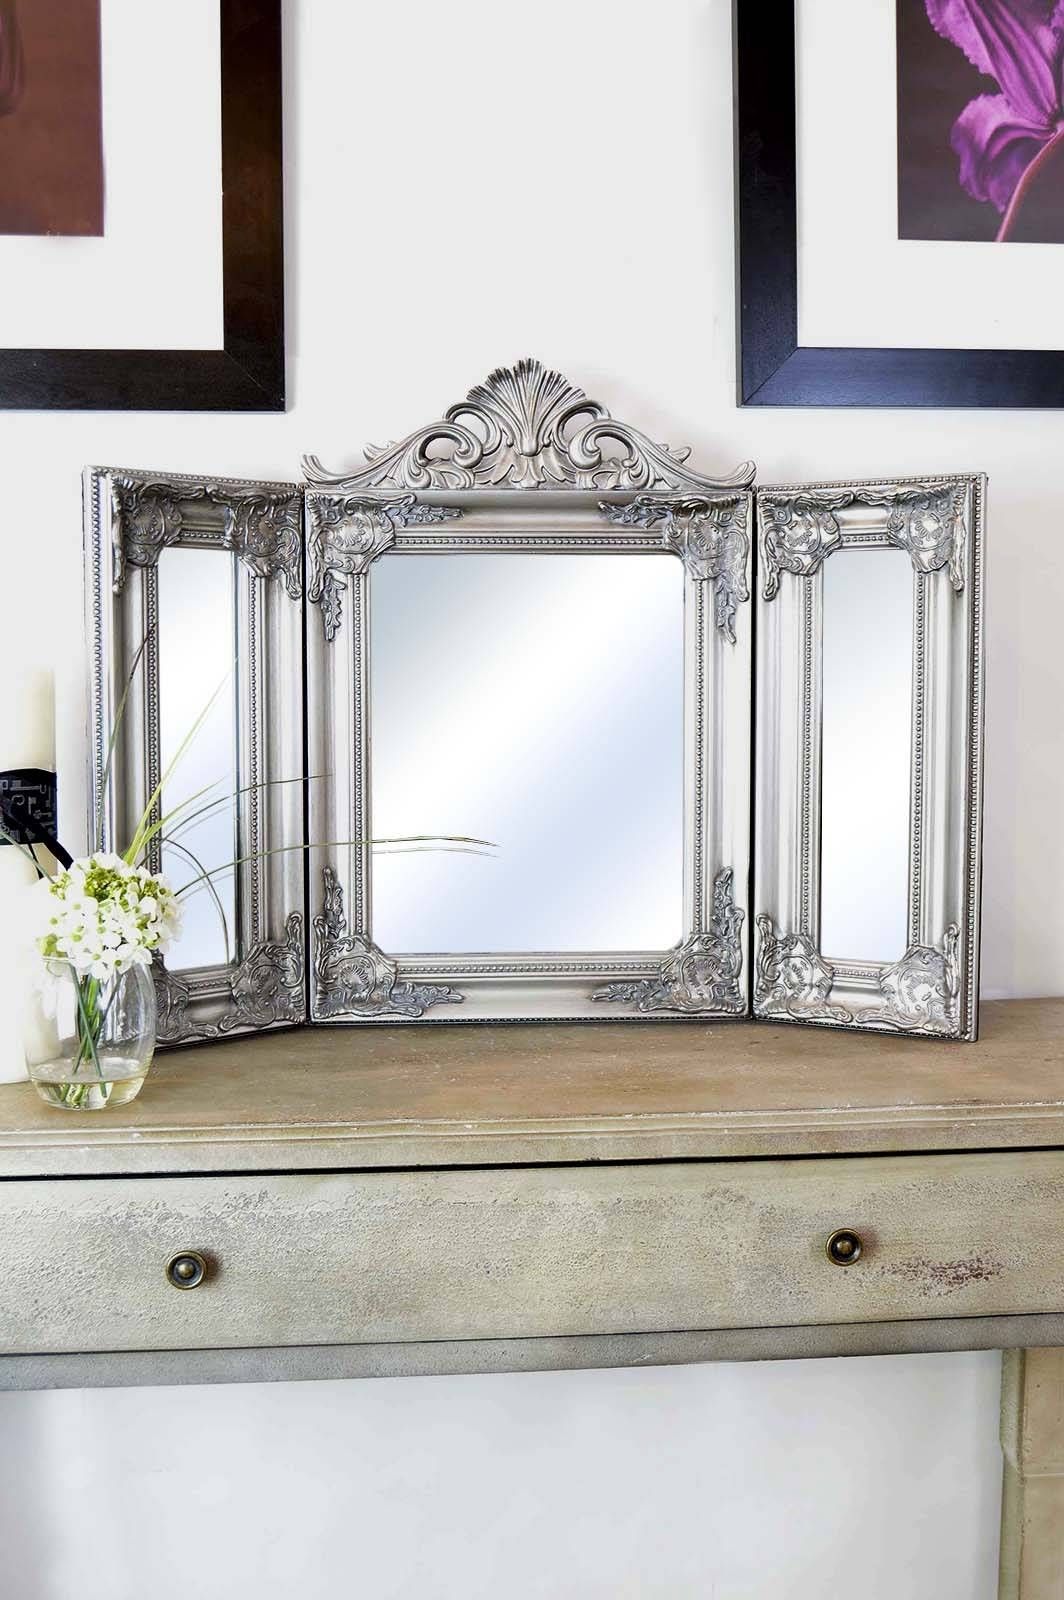 Elegant Silver Antique Style Design Free Standing Dressing Table Intended For Silver Dressing Table Mirrors (View 1 of 15)